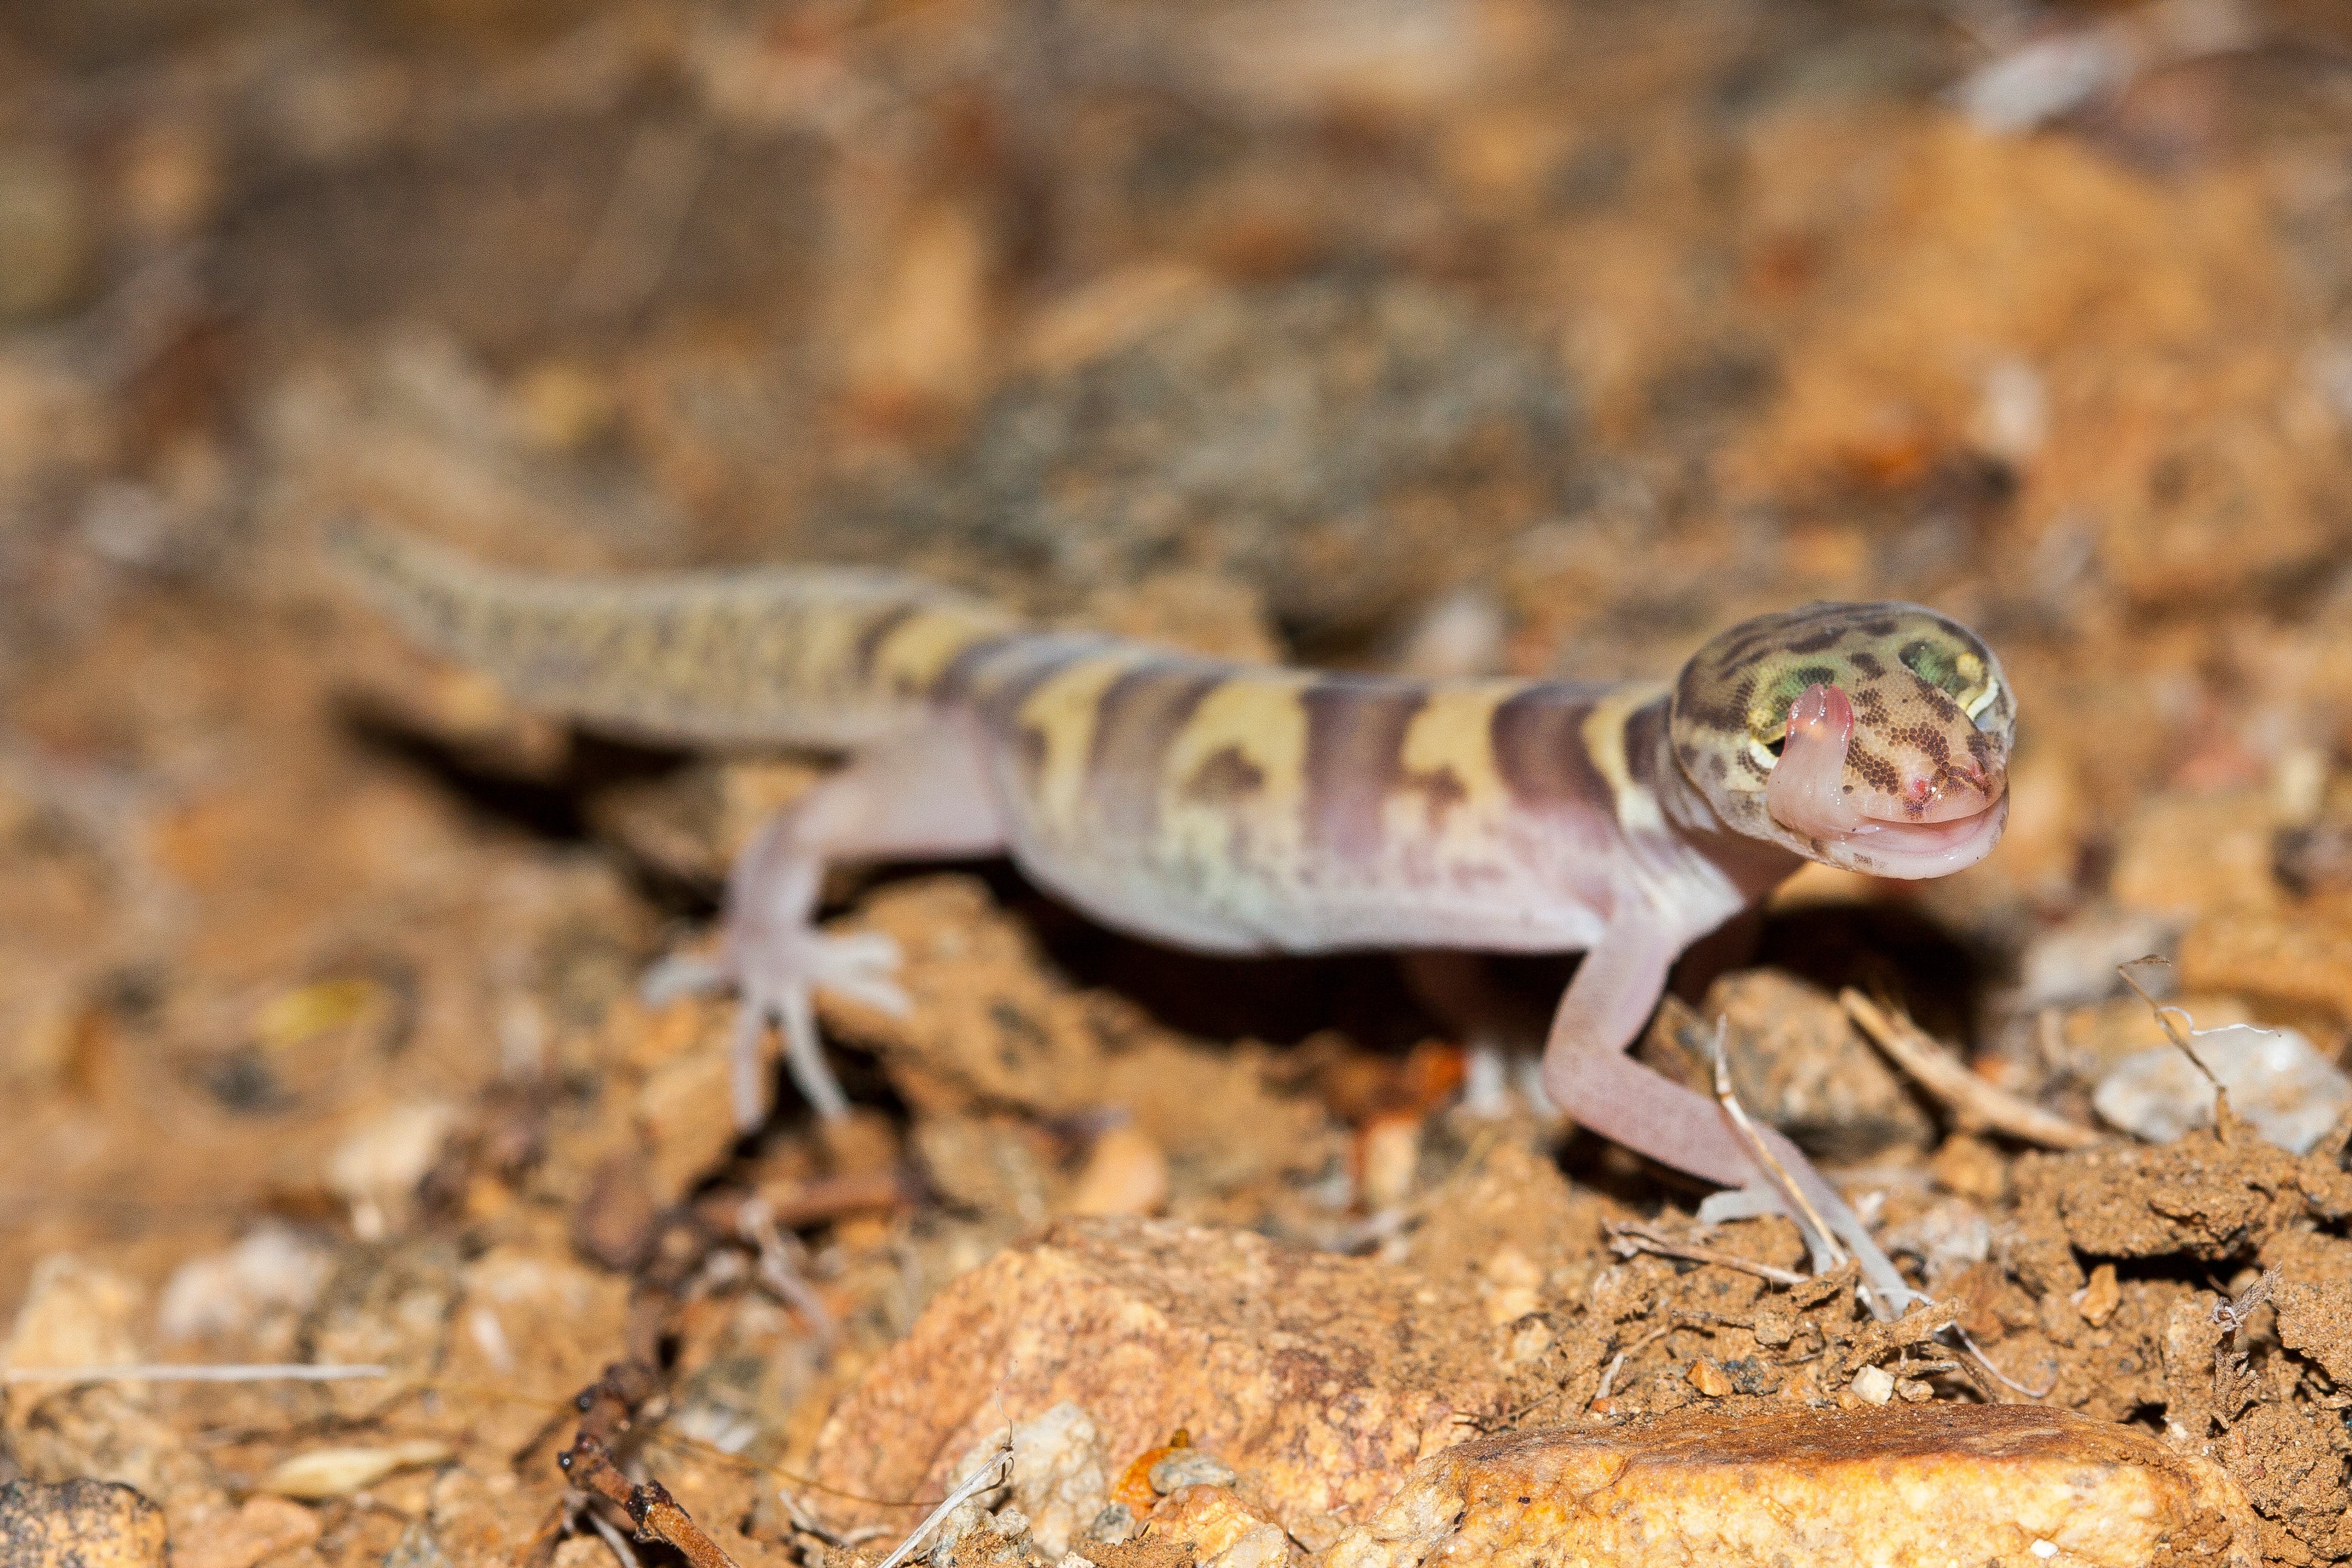 The western banded gecko